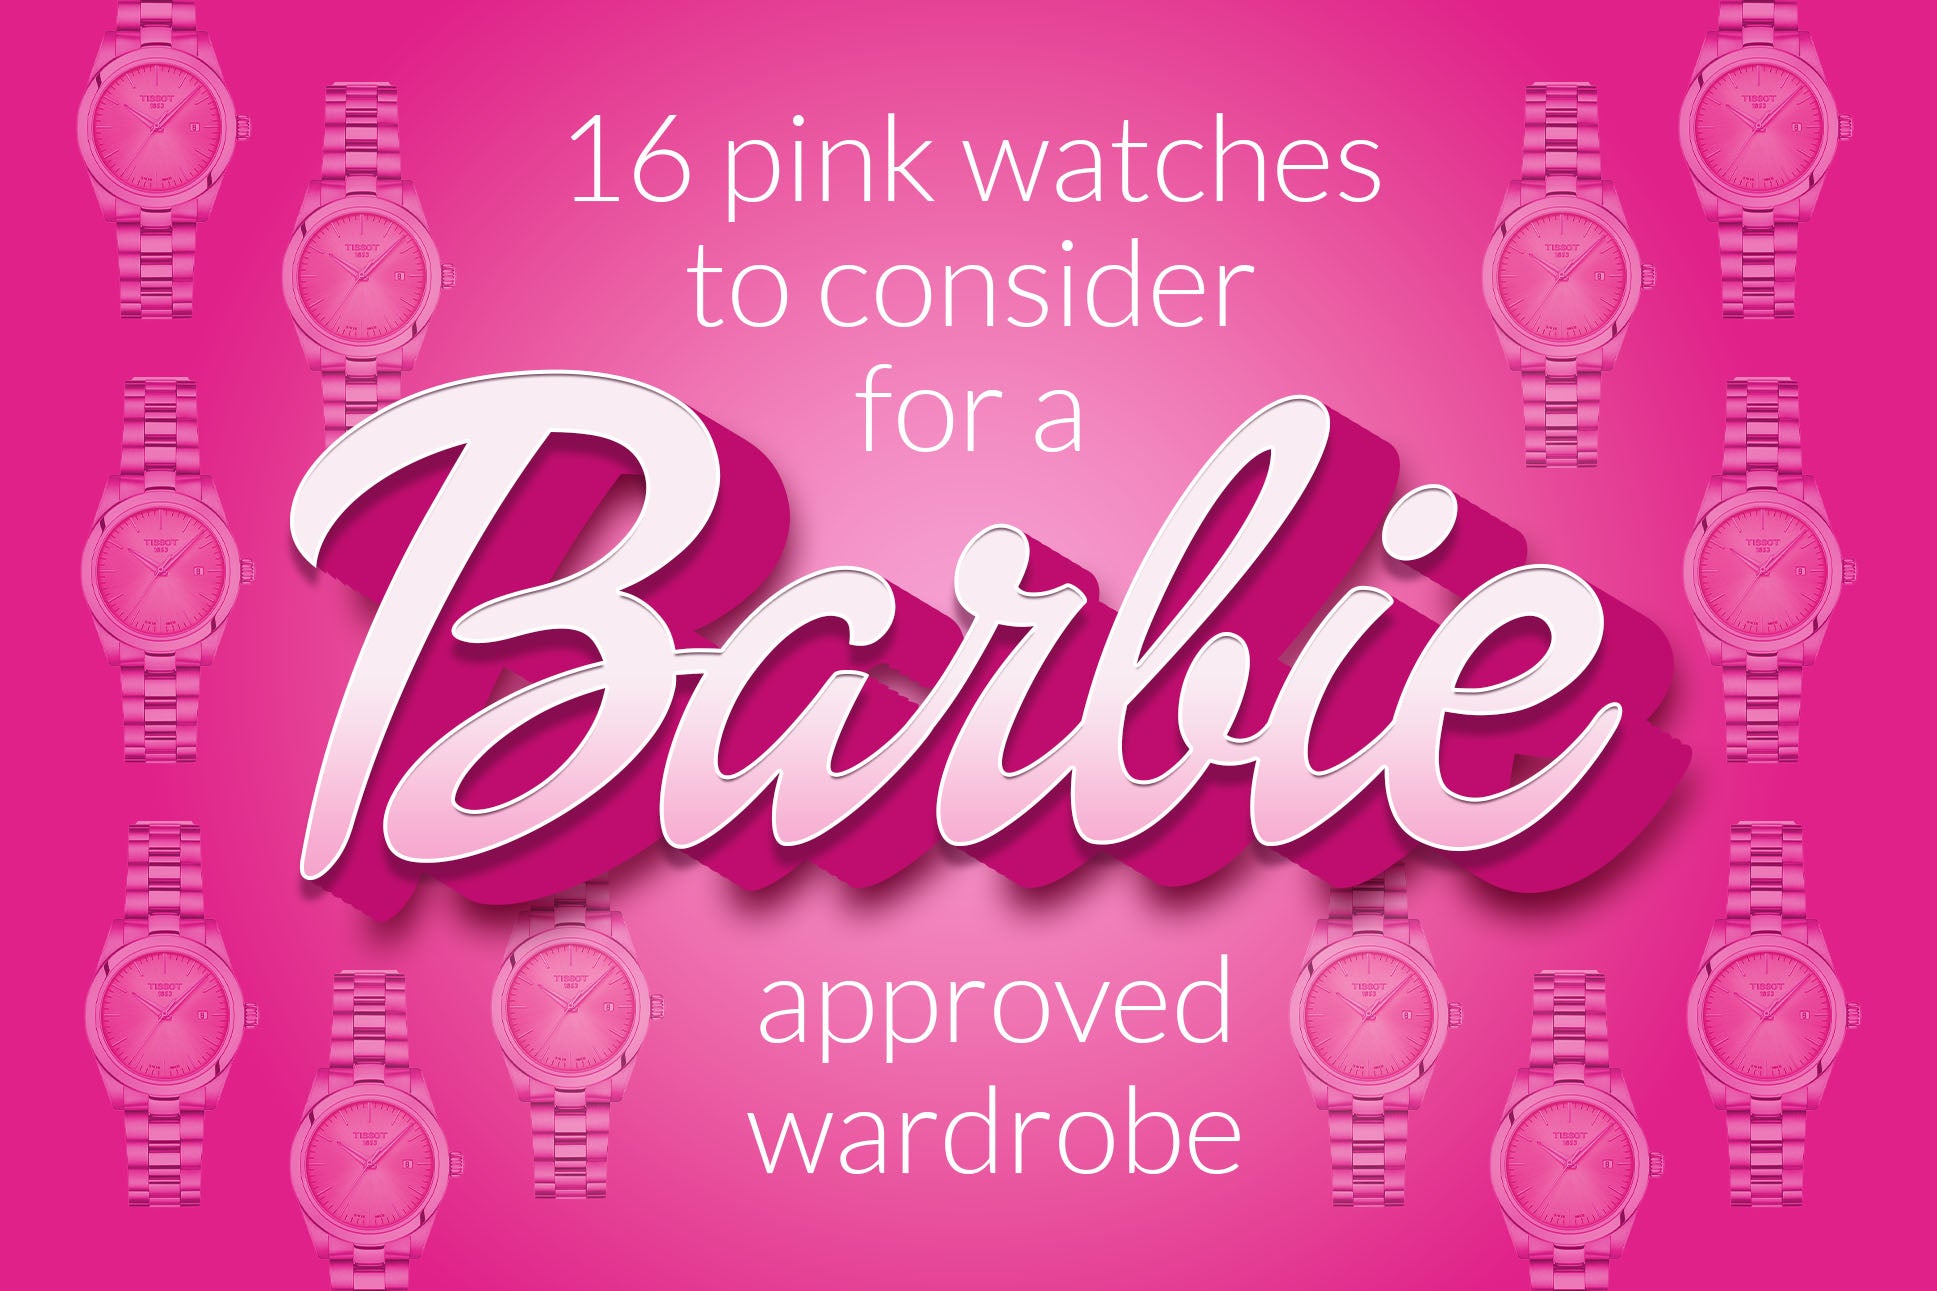 Wall Clock Barbie - India's Premium Party Store - Wanna Party